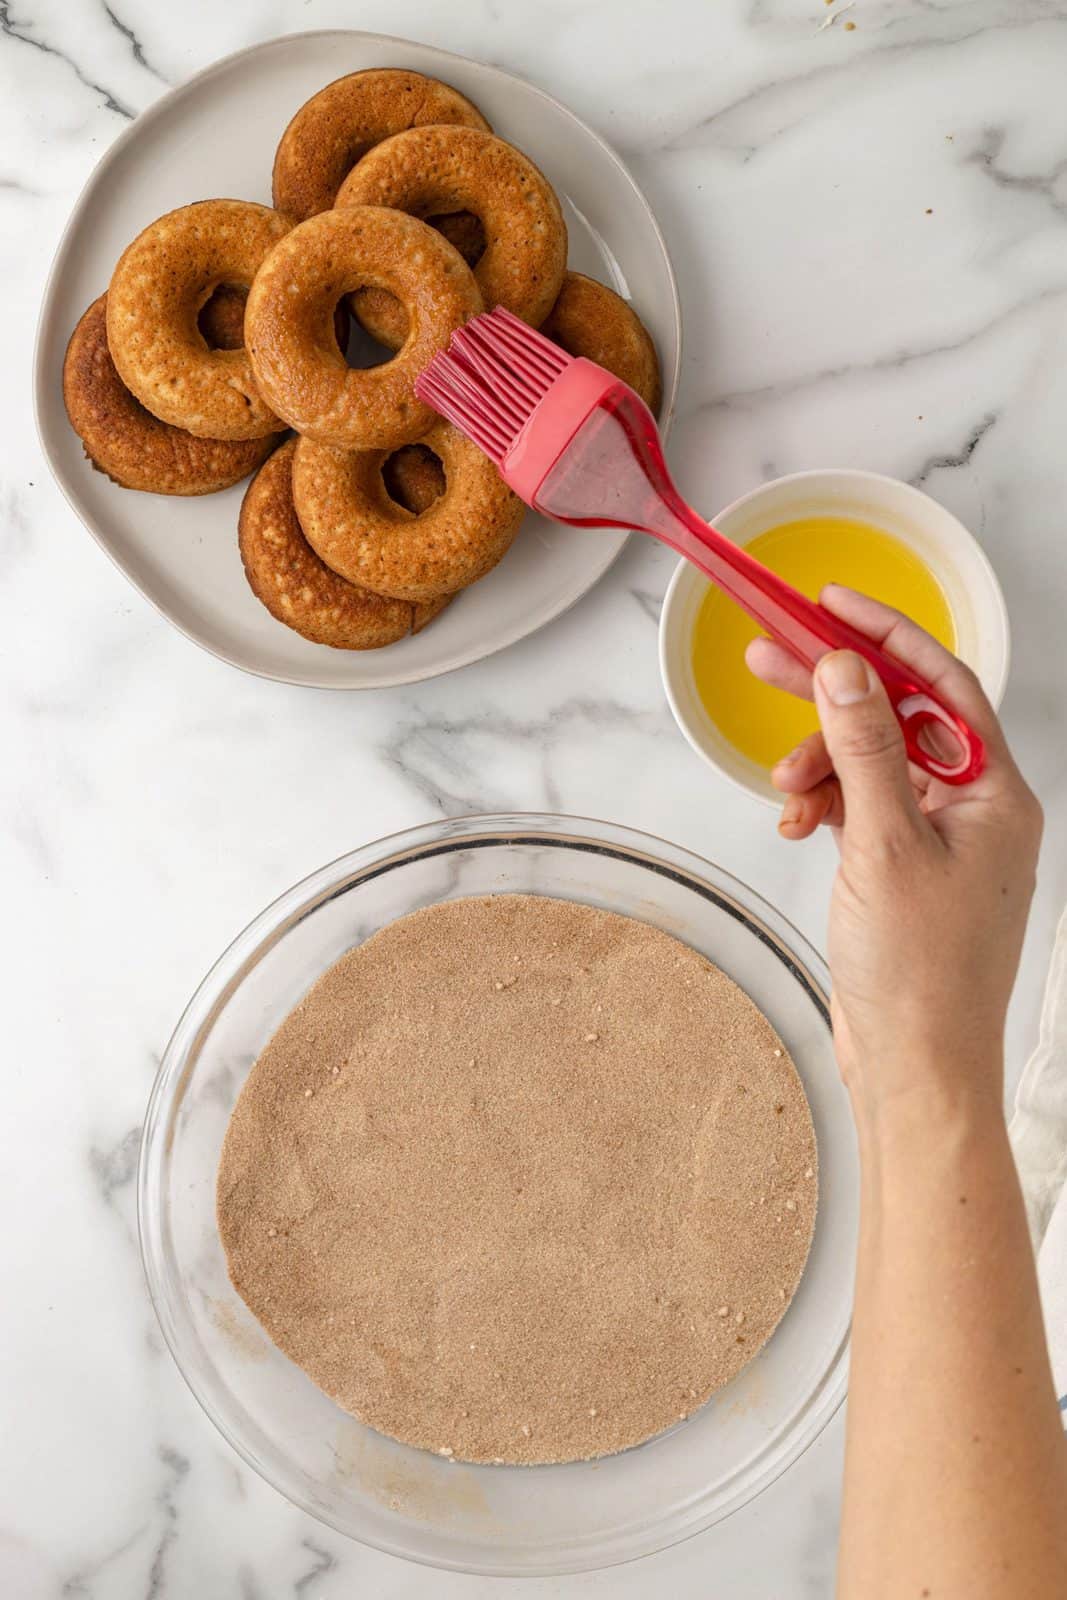 Mixed up cinnamon sugar in bowl and hand brushing donut with melted butter.